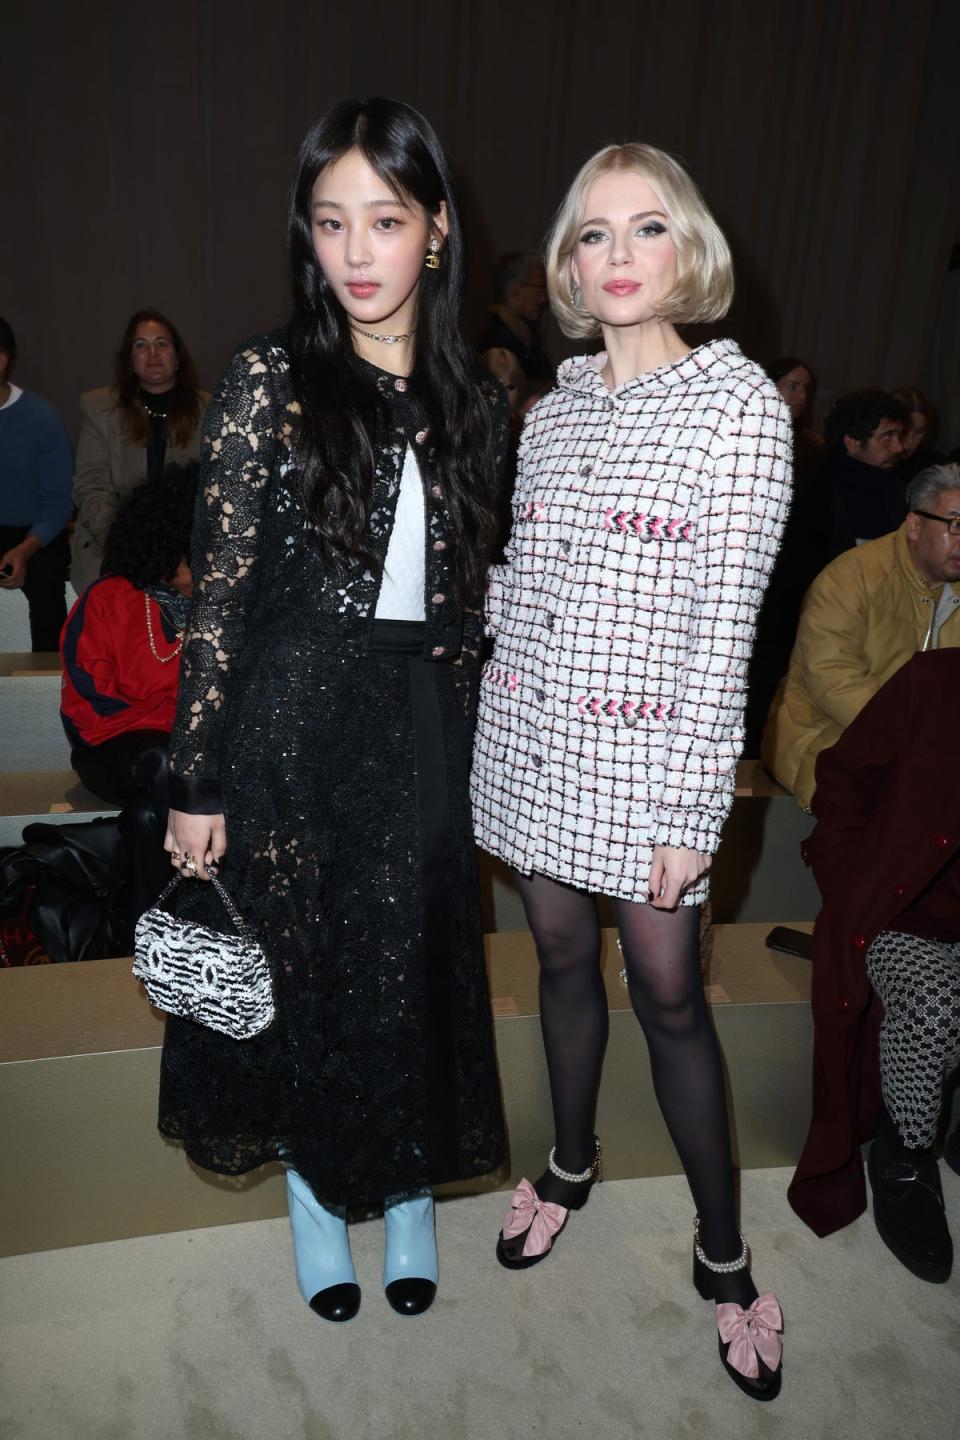 Min Ji and Lucy Boynton attend the Chanel Haute Couture show (Getty Images)